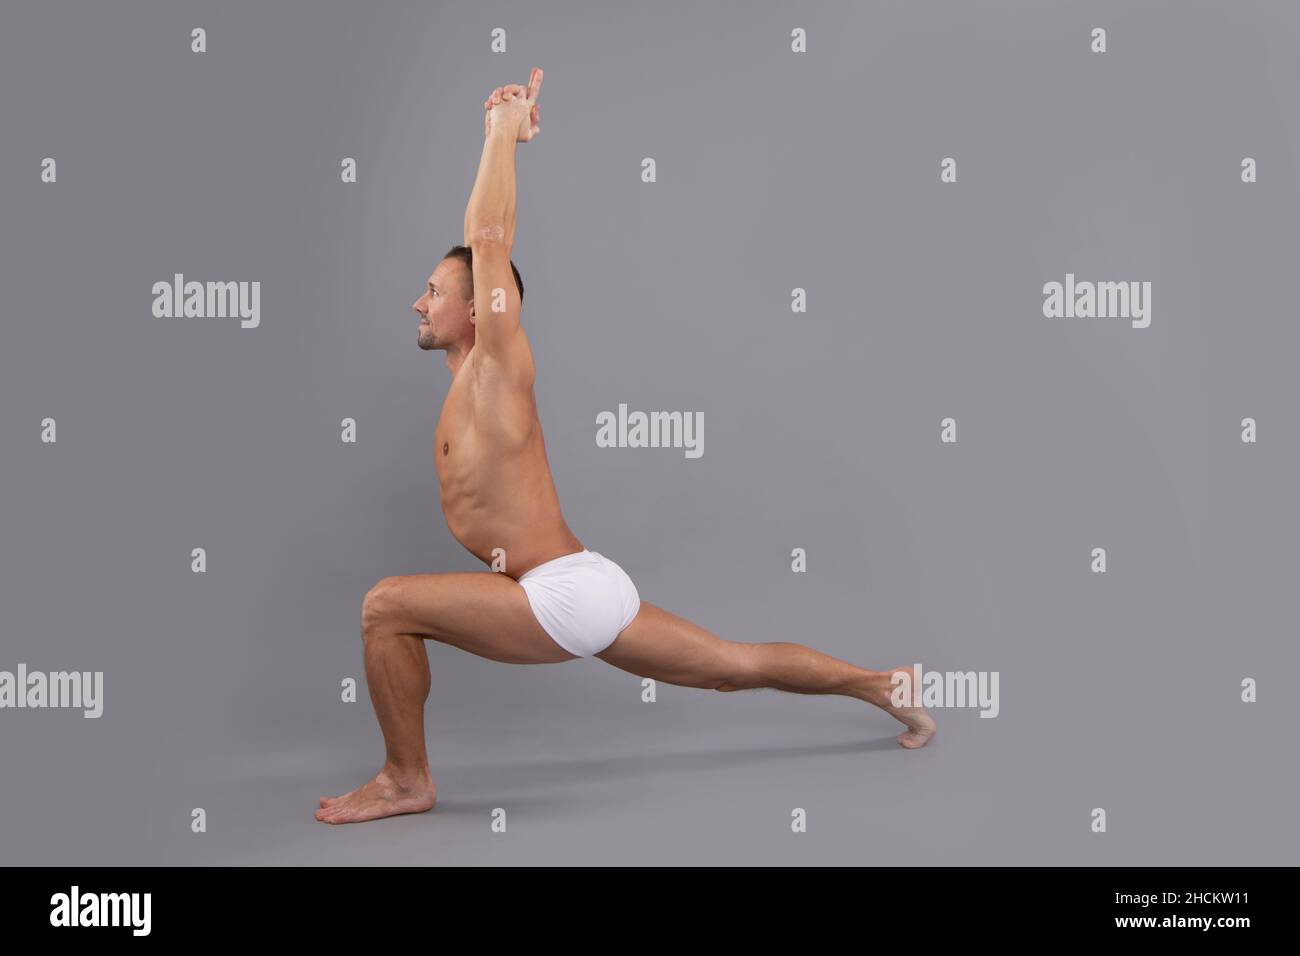 Pilates for every body. Fit guy do crescent lunge greybackground. Yoga and pilates exercise Stock Photo